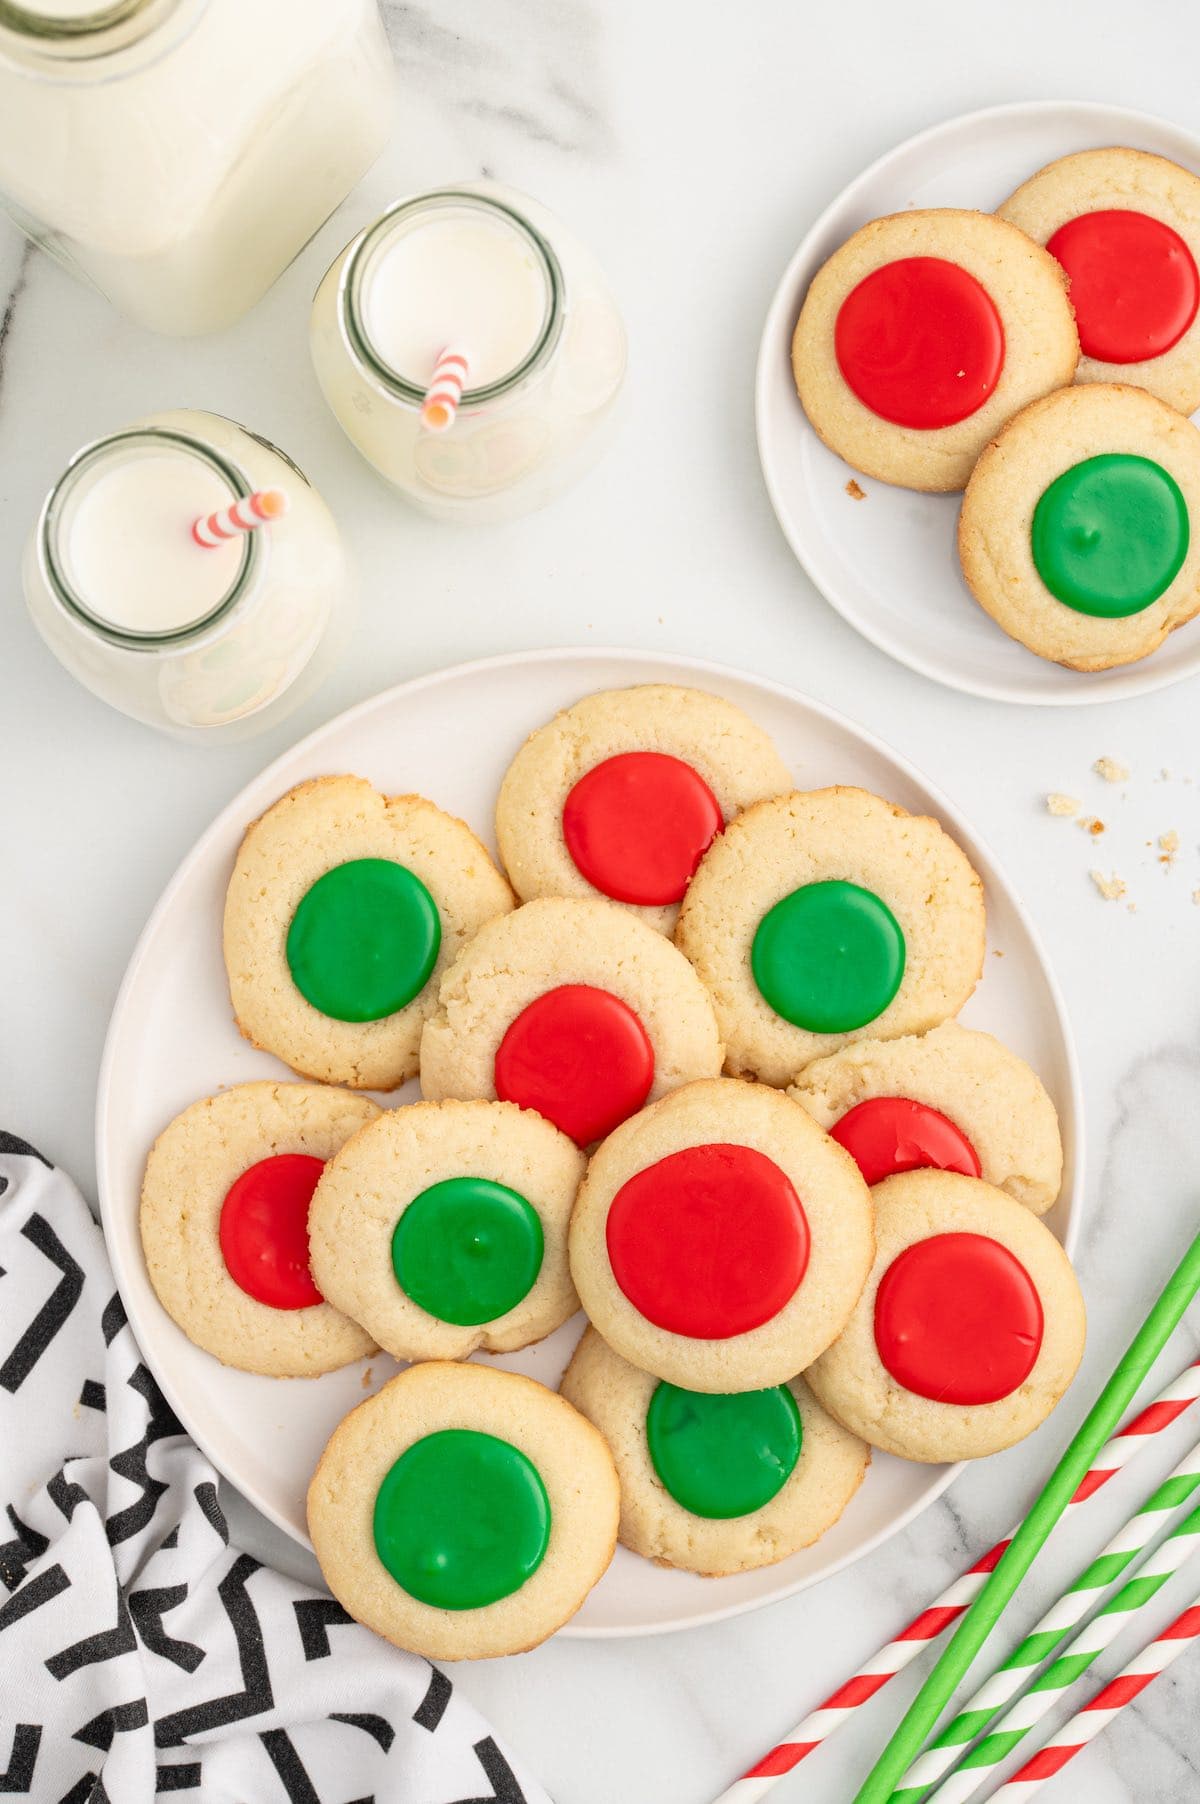 thumbprint cookies with red and green icing.